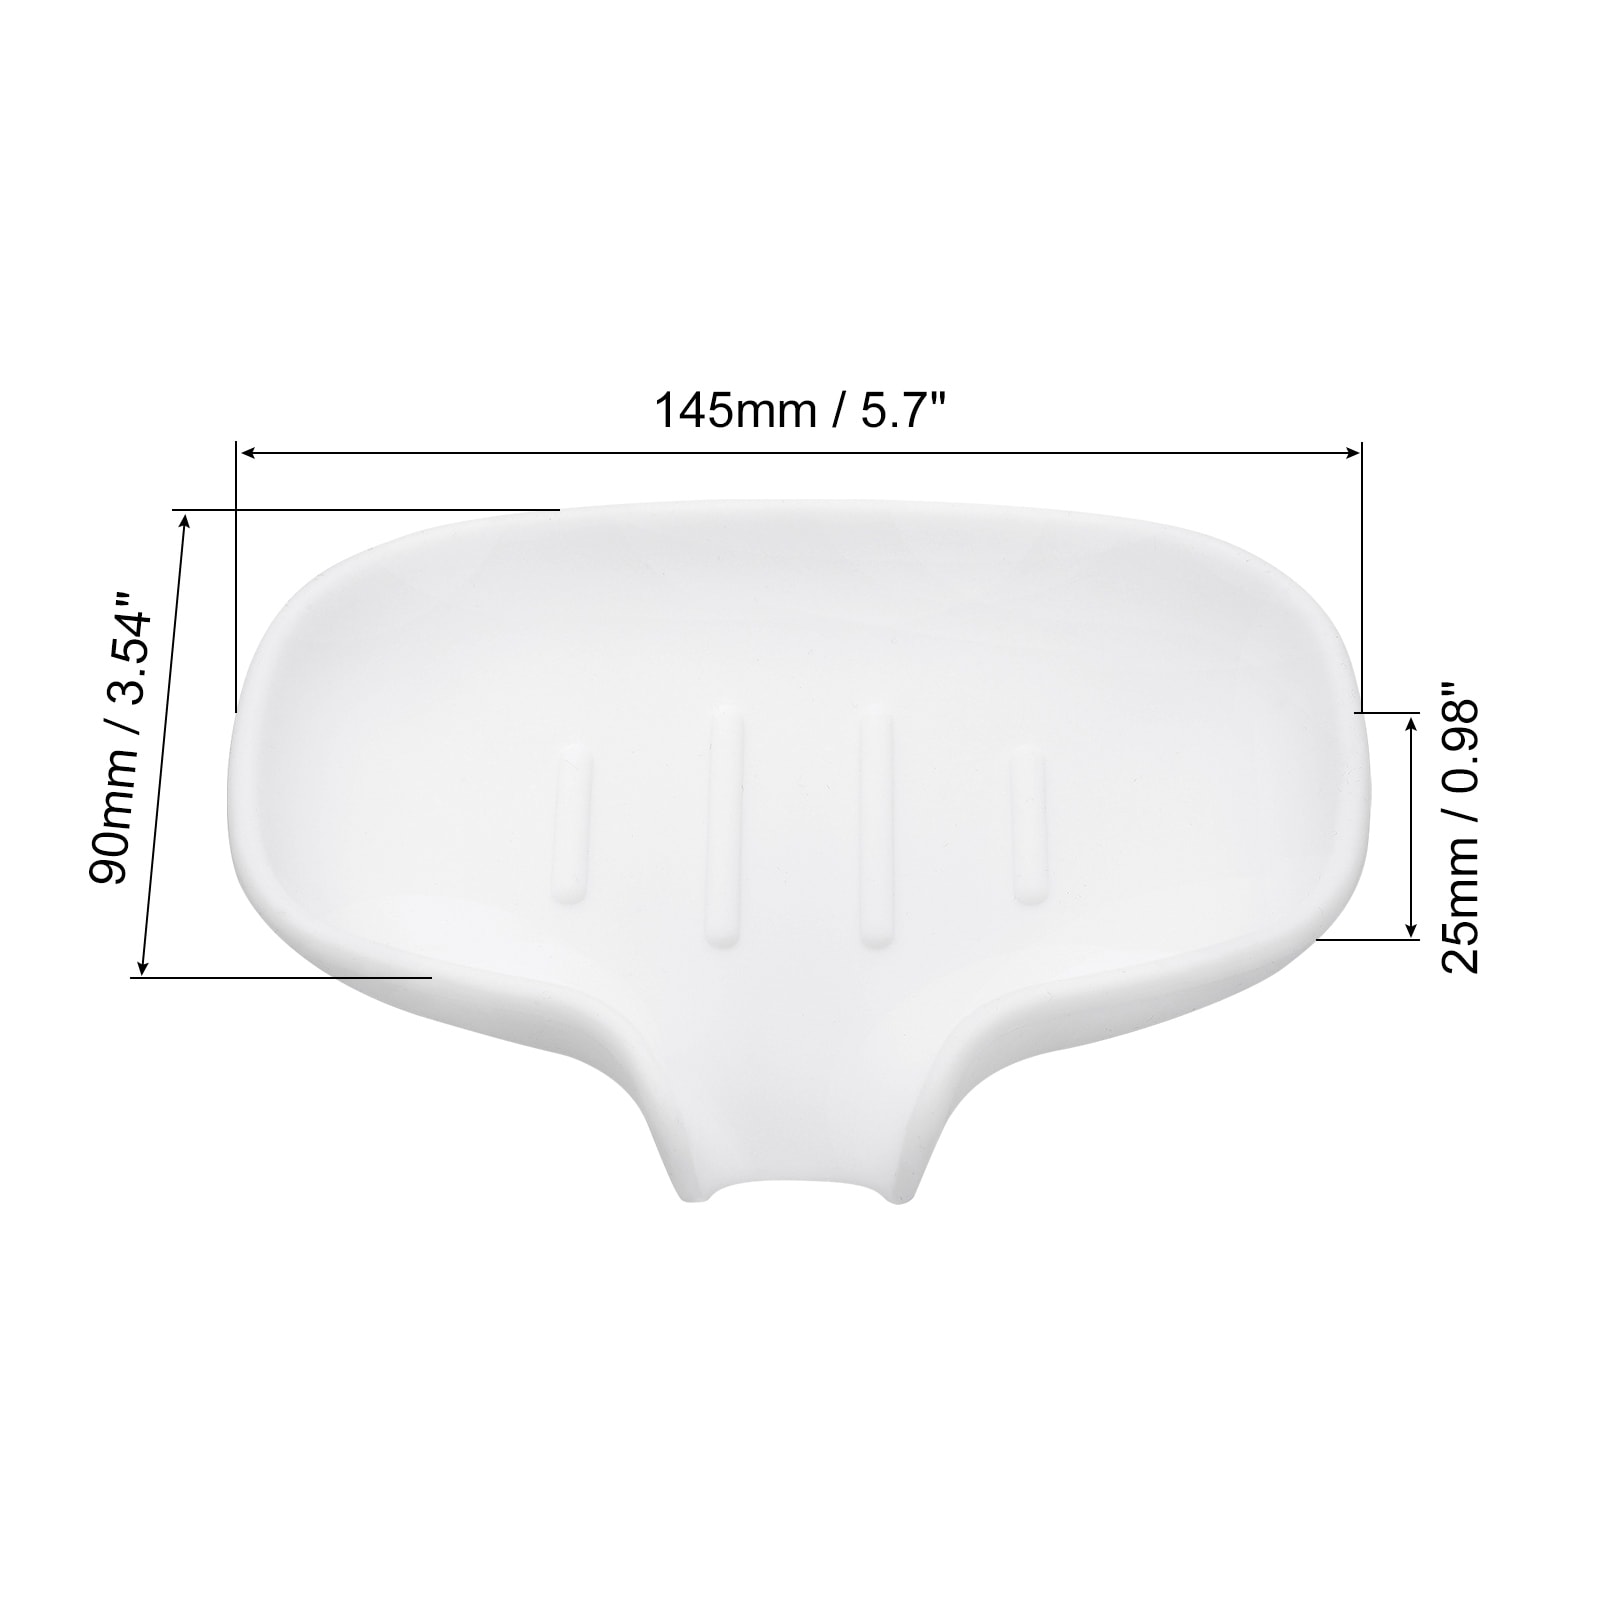 https://ak1.ostkcdn.com/images/products/is/images/direct/32e4c85177fbe9eff20867c09bcc06c8b8a2407f/Soap-Dish-with-Drain-Tray%2C-Silicone-Self-Draining-Waterfall-Soap-Saver.jpg